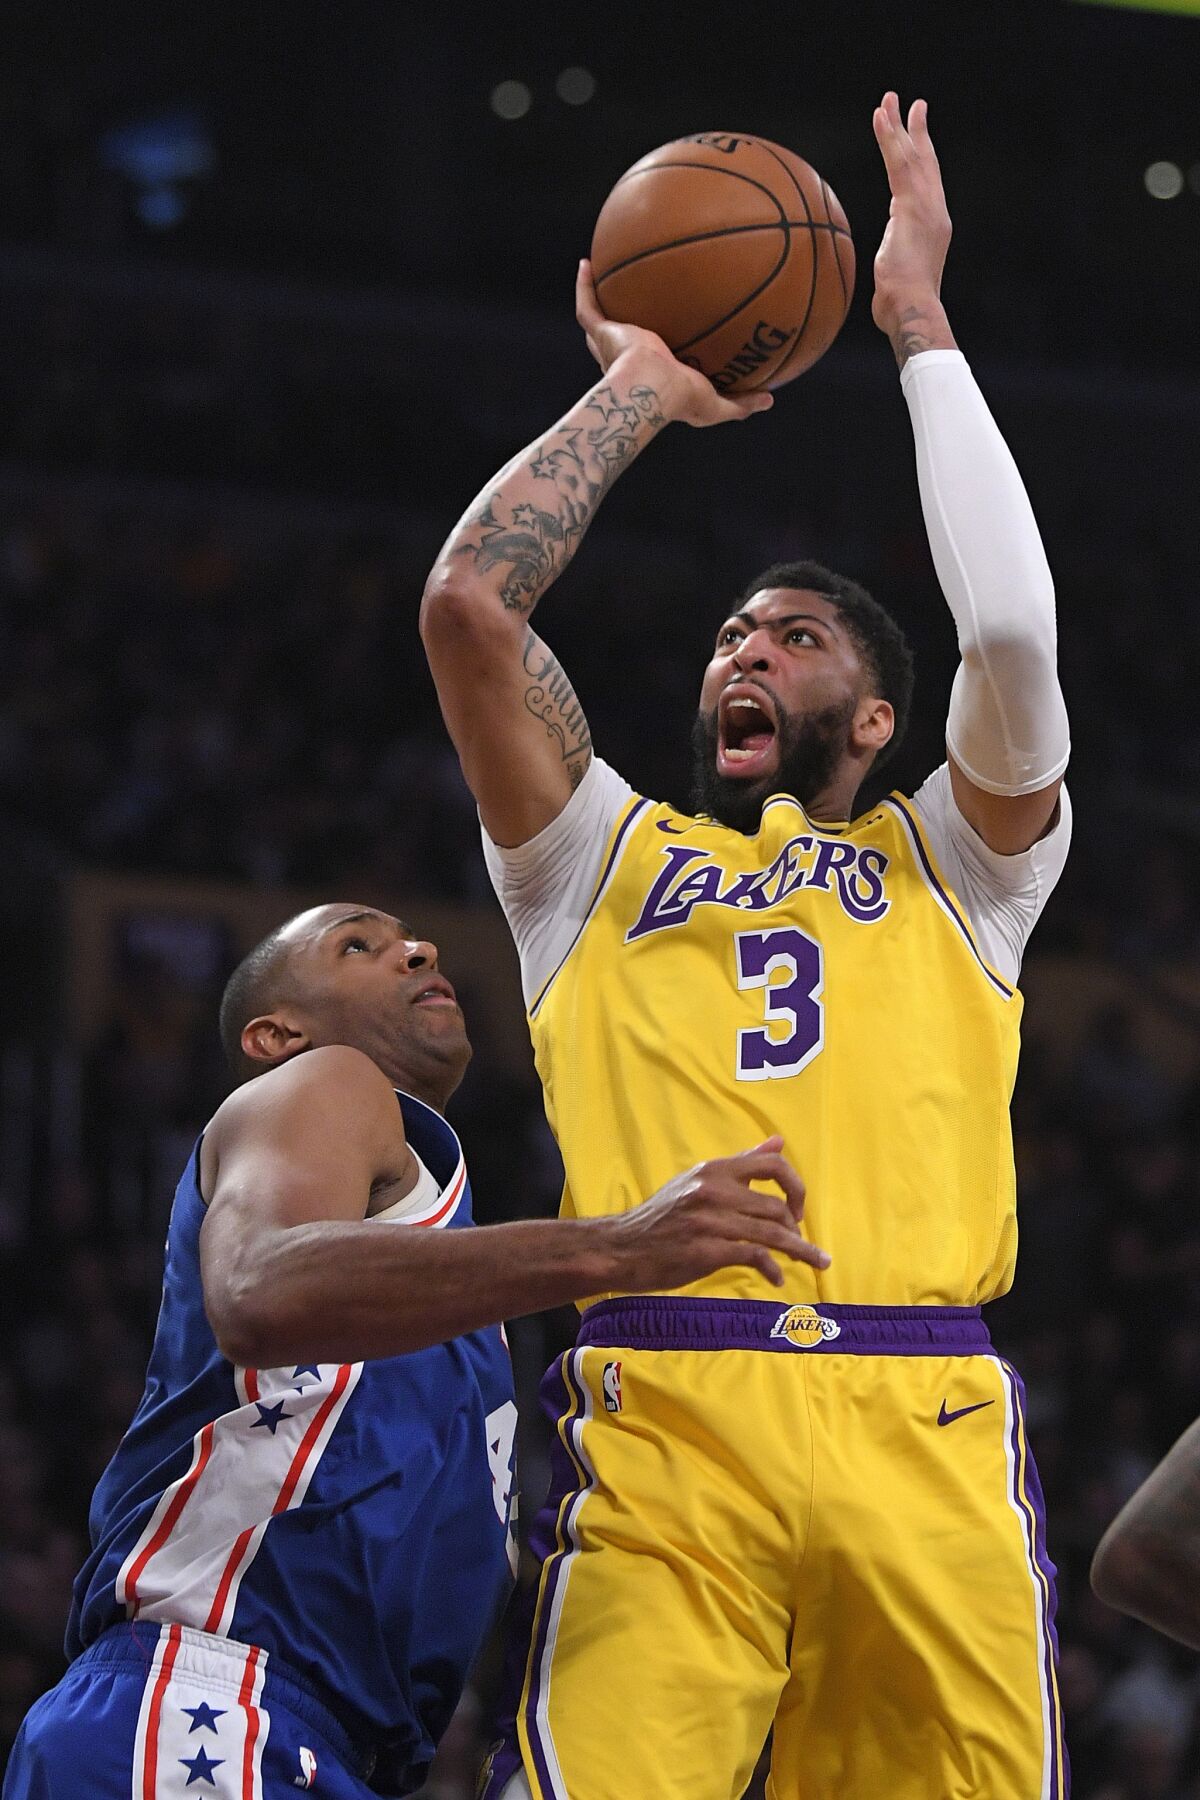 Anthony Davis puts a shot up over the 76ers' Al Horford during the first half of a game March 3 at Staples Center.